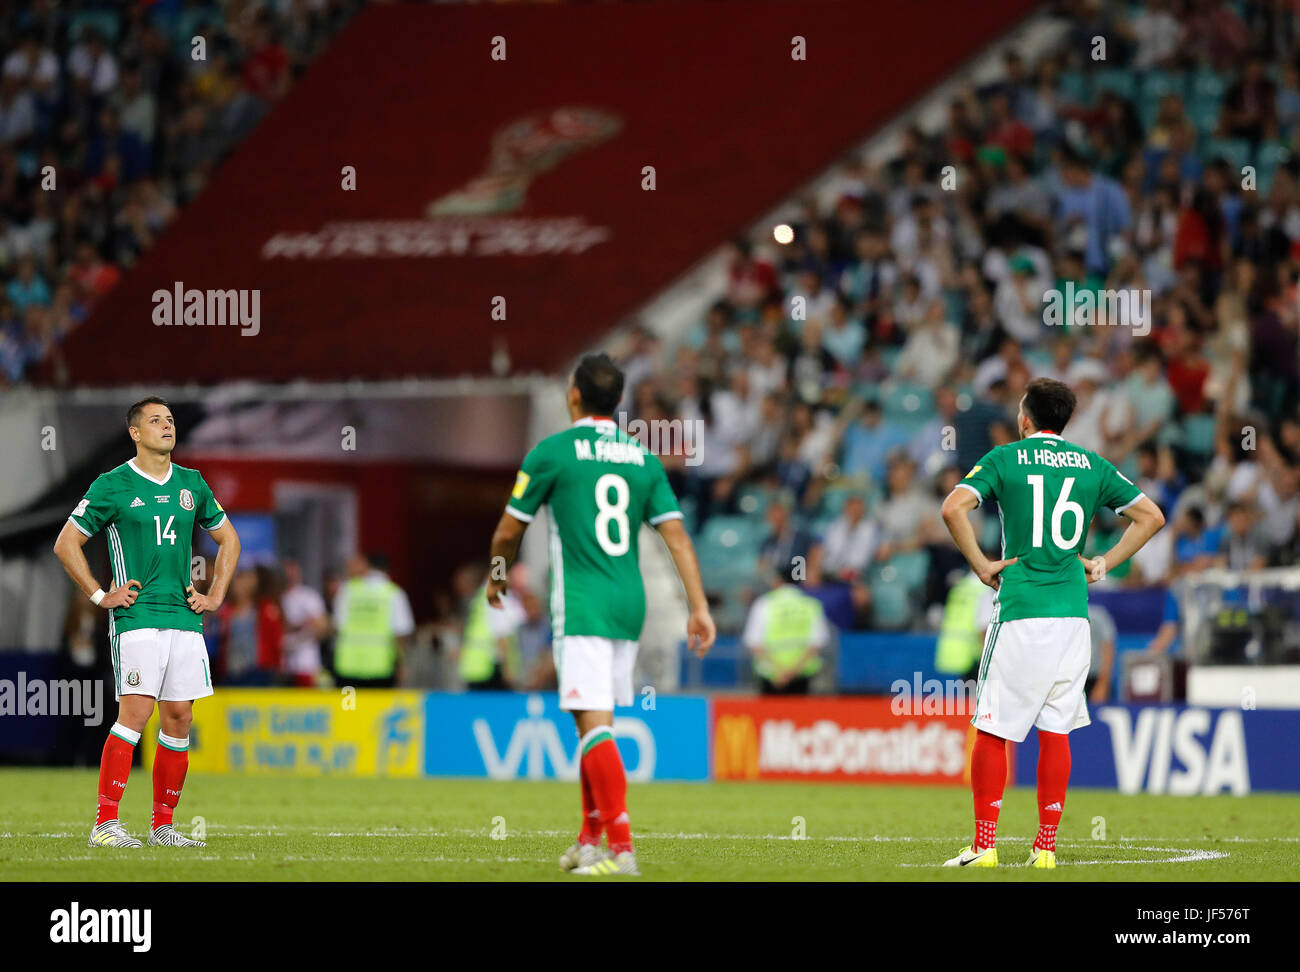 SOCHI, SC - 29.06.2017: GERMANY VS MEXICO - HERNANDEZ Javier, FABIAN Marco and HERRERA Hector of Mexico during a match between Germany and Mexico valid for the semifinals of the 2017 Confederations Cup on Thursday (29th), held at the Sochi Olympic Stadium in Sochi, Russia. (Photo: Rodolfo Buhrer/La Imagem/Fotoarena) Stock Photo